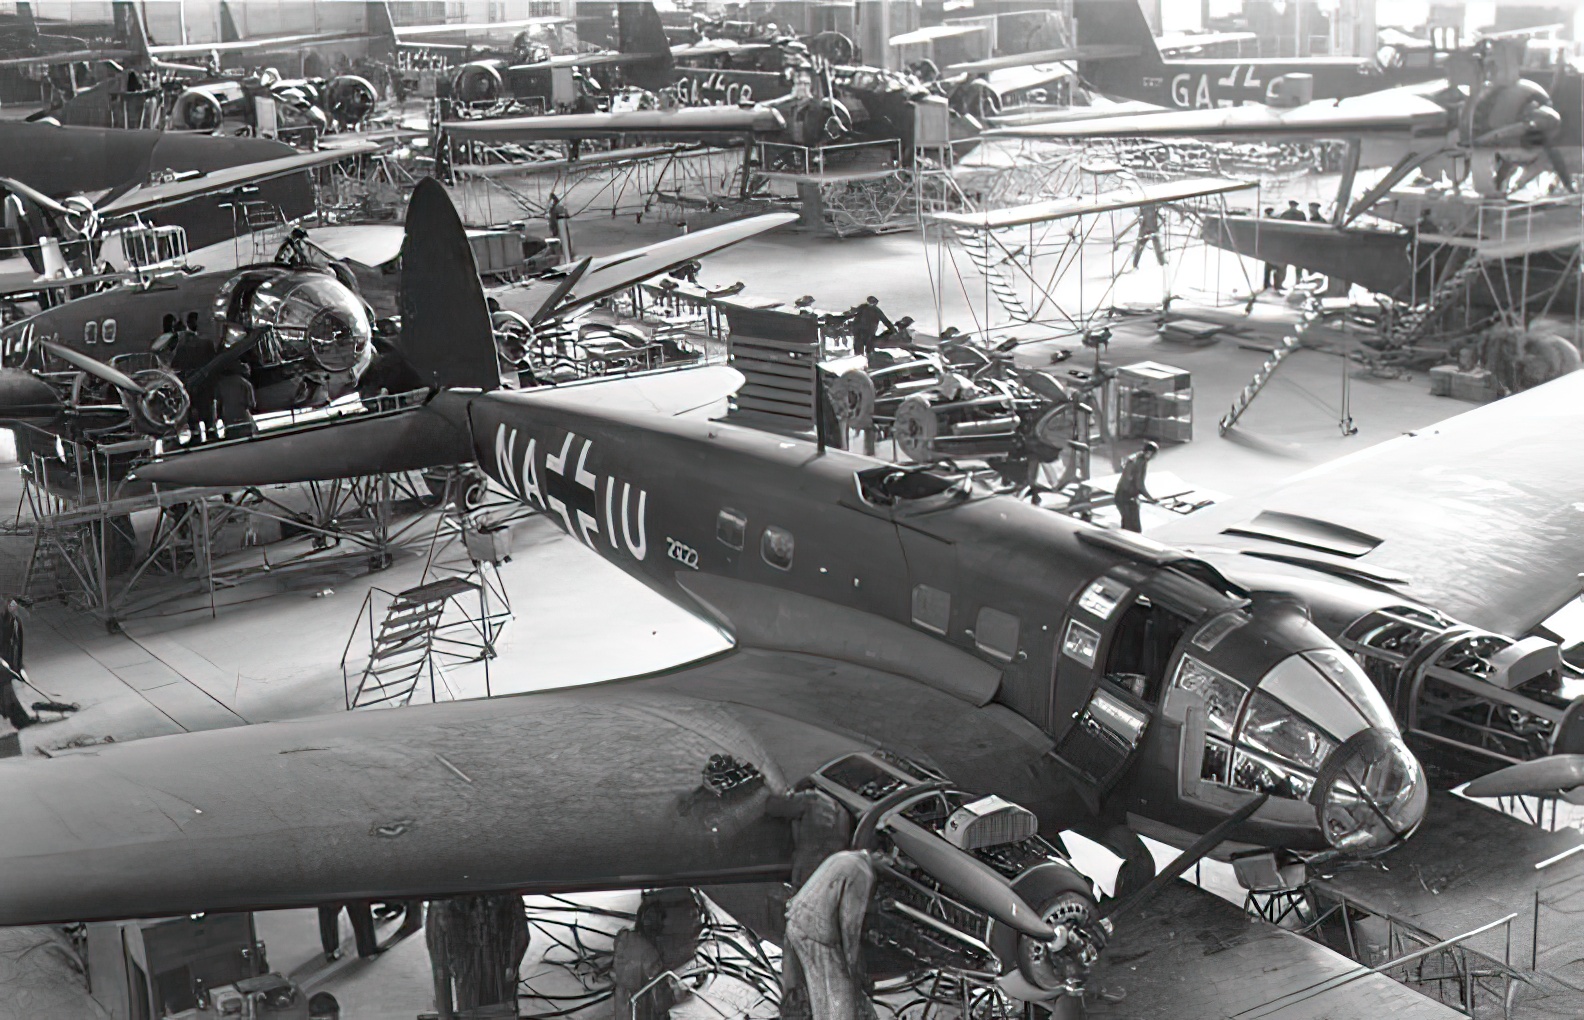 Production of aircraft Heinkel He 111